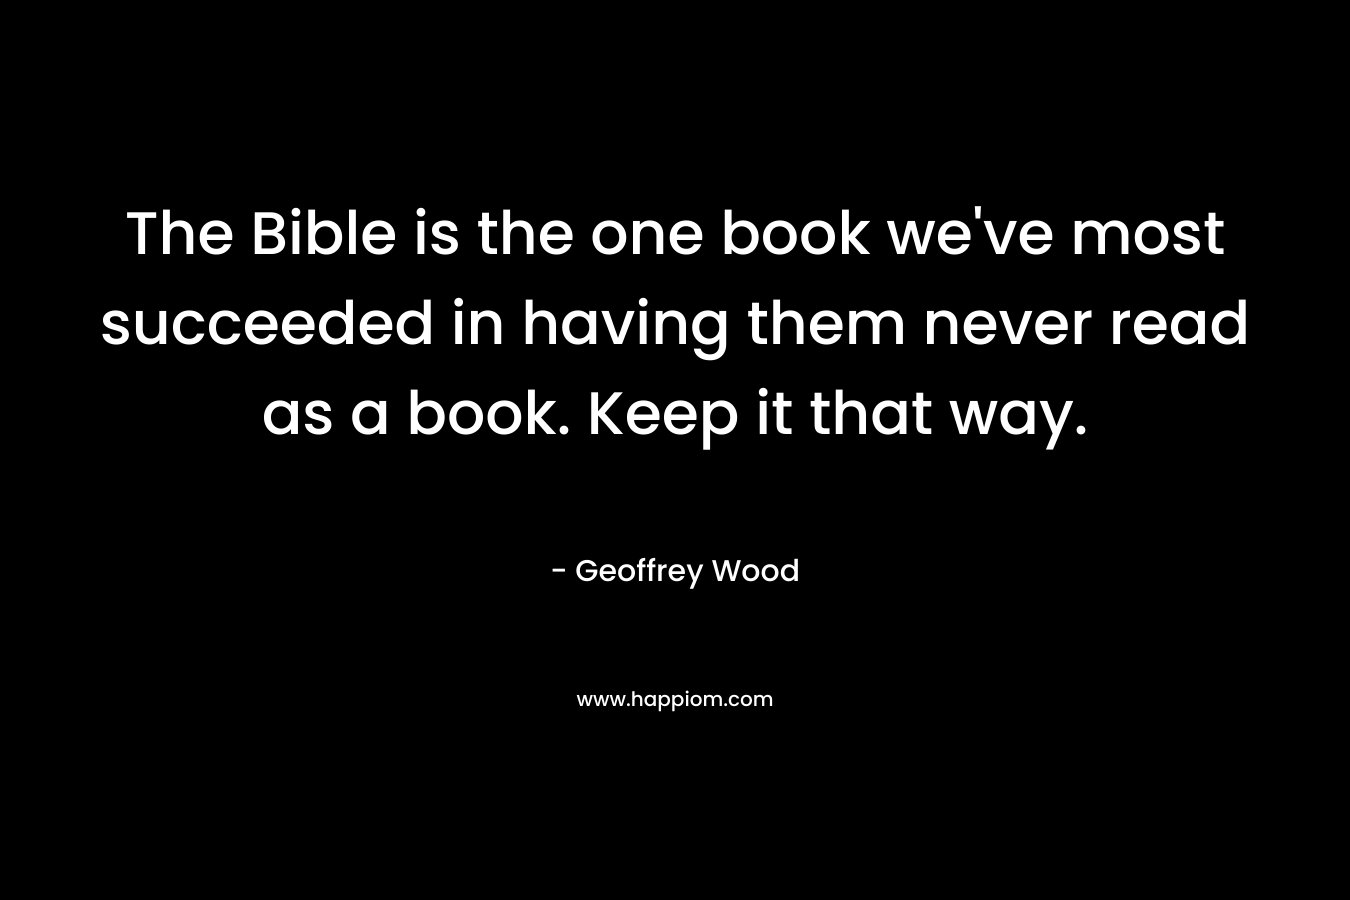 The Bible is the one book we’ve most succeeded in having them never read as a book. Keep it that way. – Geoffrey Wood